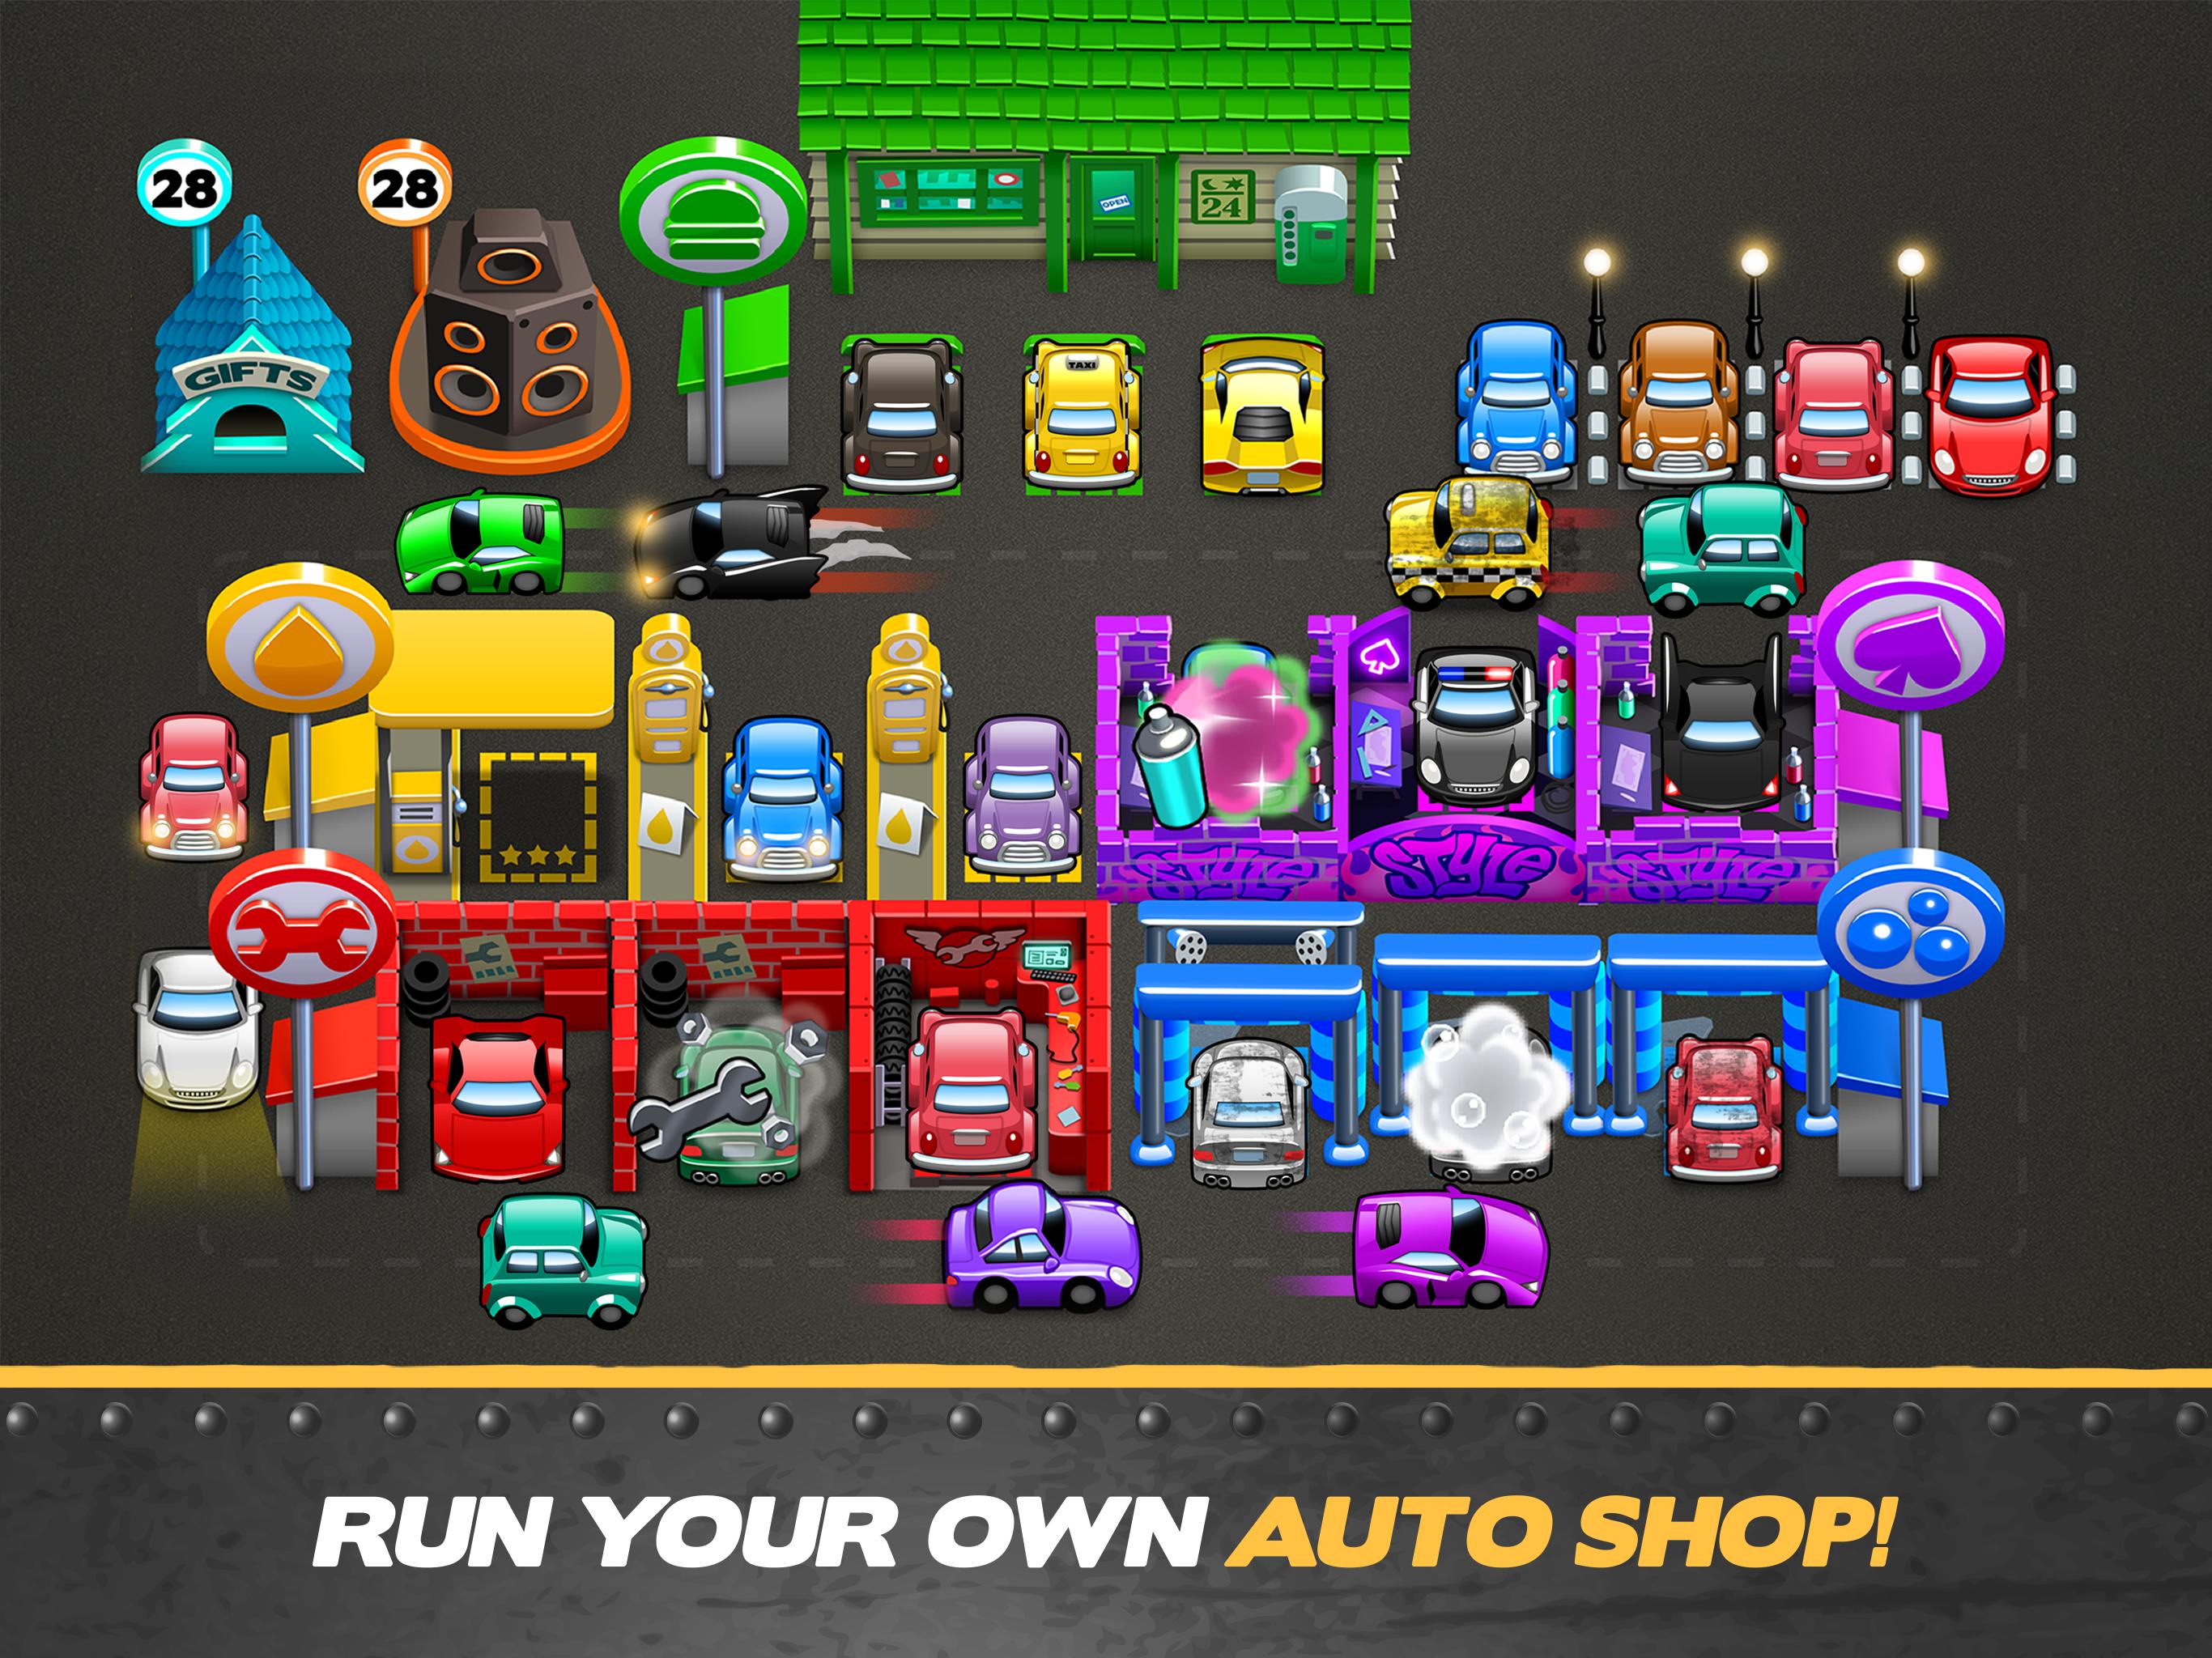 Tiny Auto Shop Car Wash And Garage Game For Android Apk Download - my own car wash business in roblox roblox car wash tycoon youtube